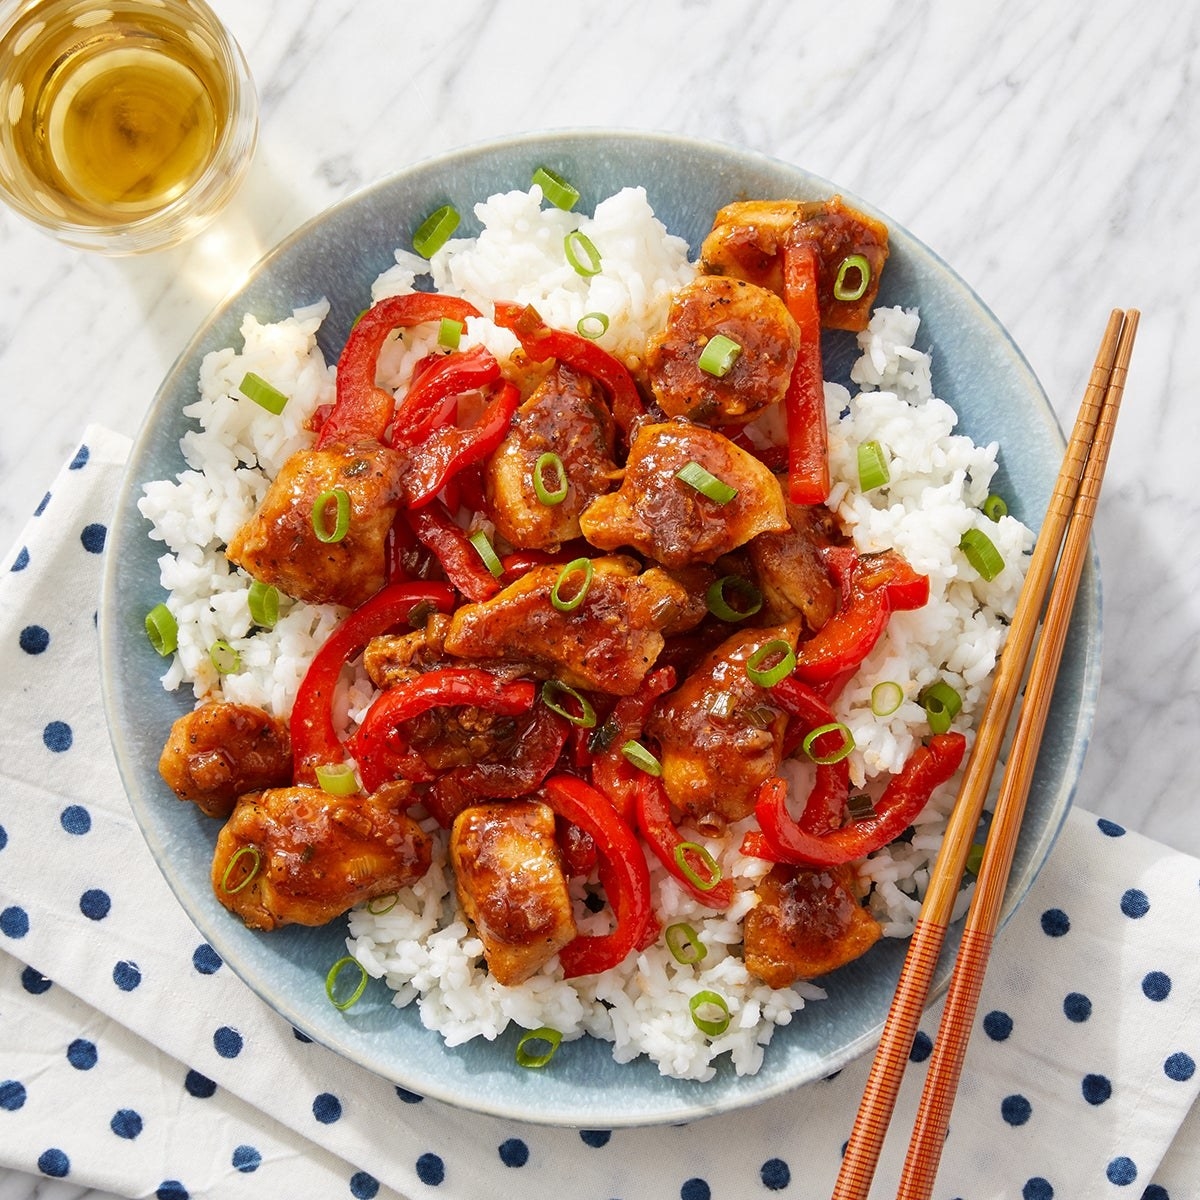 Sweet and spicy chicken dish.